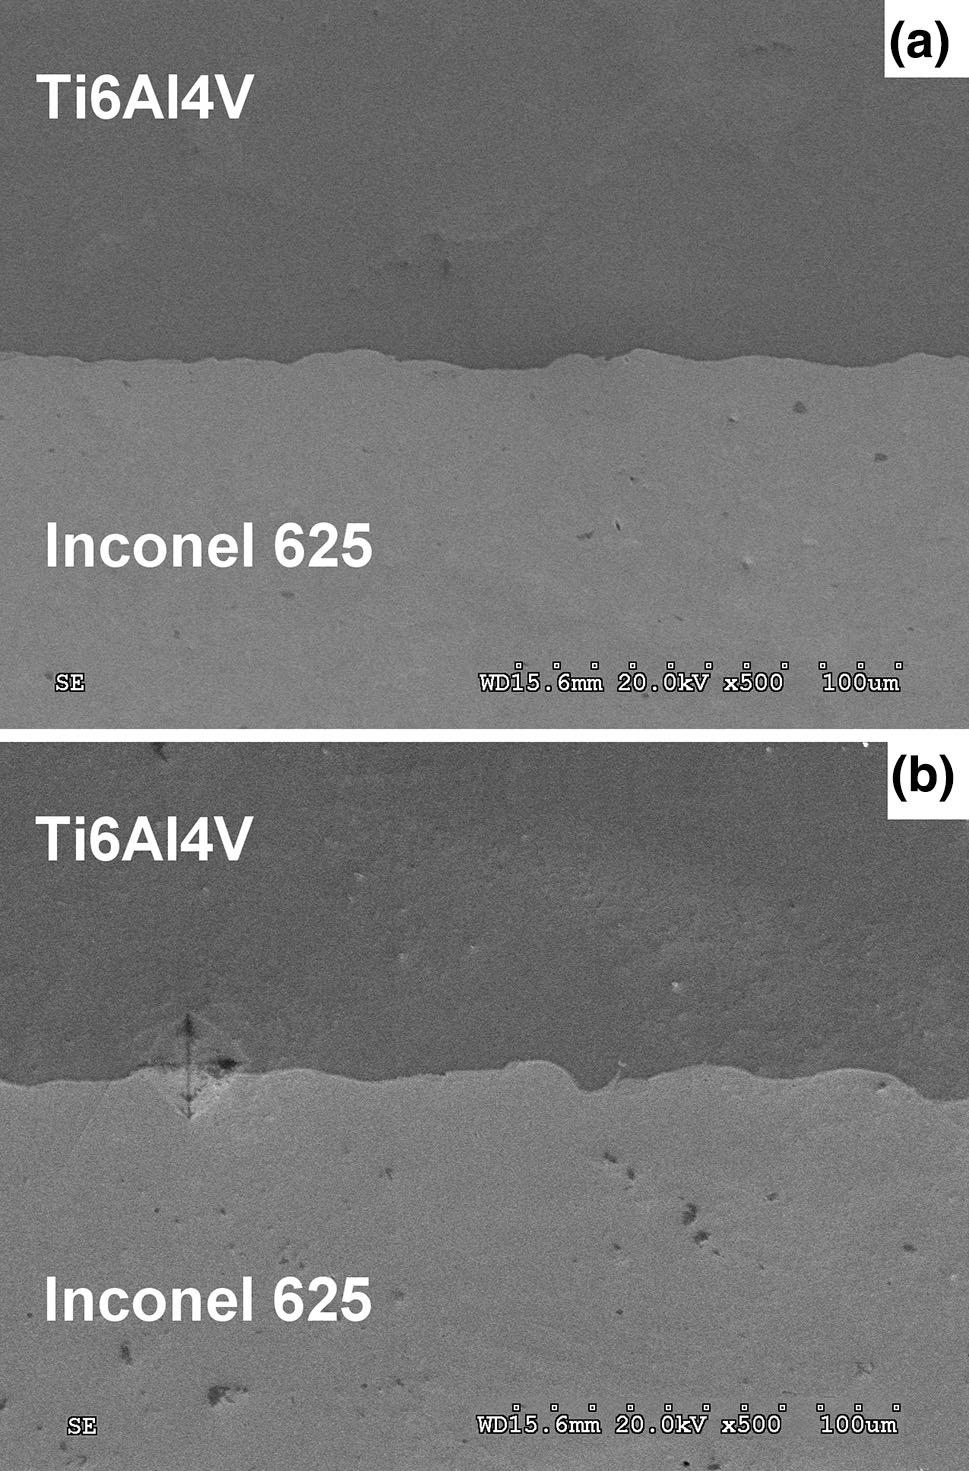 The detonation and the shock wave generated during the explosion resulted in both the Ti6Al4V and Inconel 625 sheets being deformed plastically and forming a characteristic wavy joint surface between